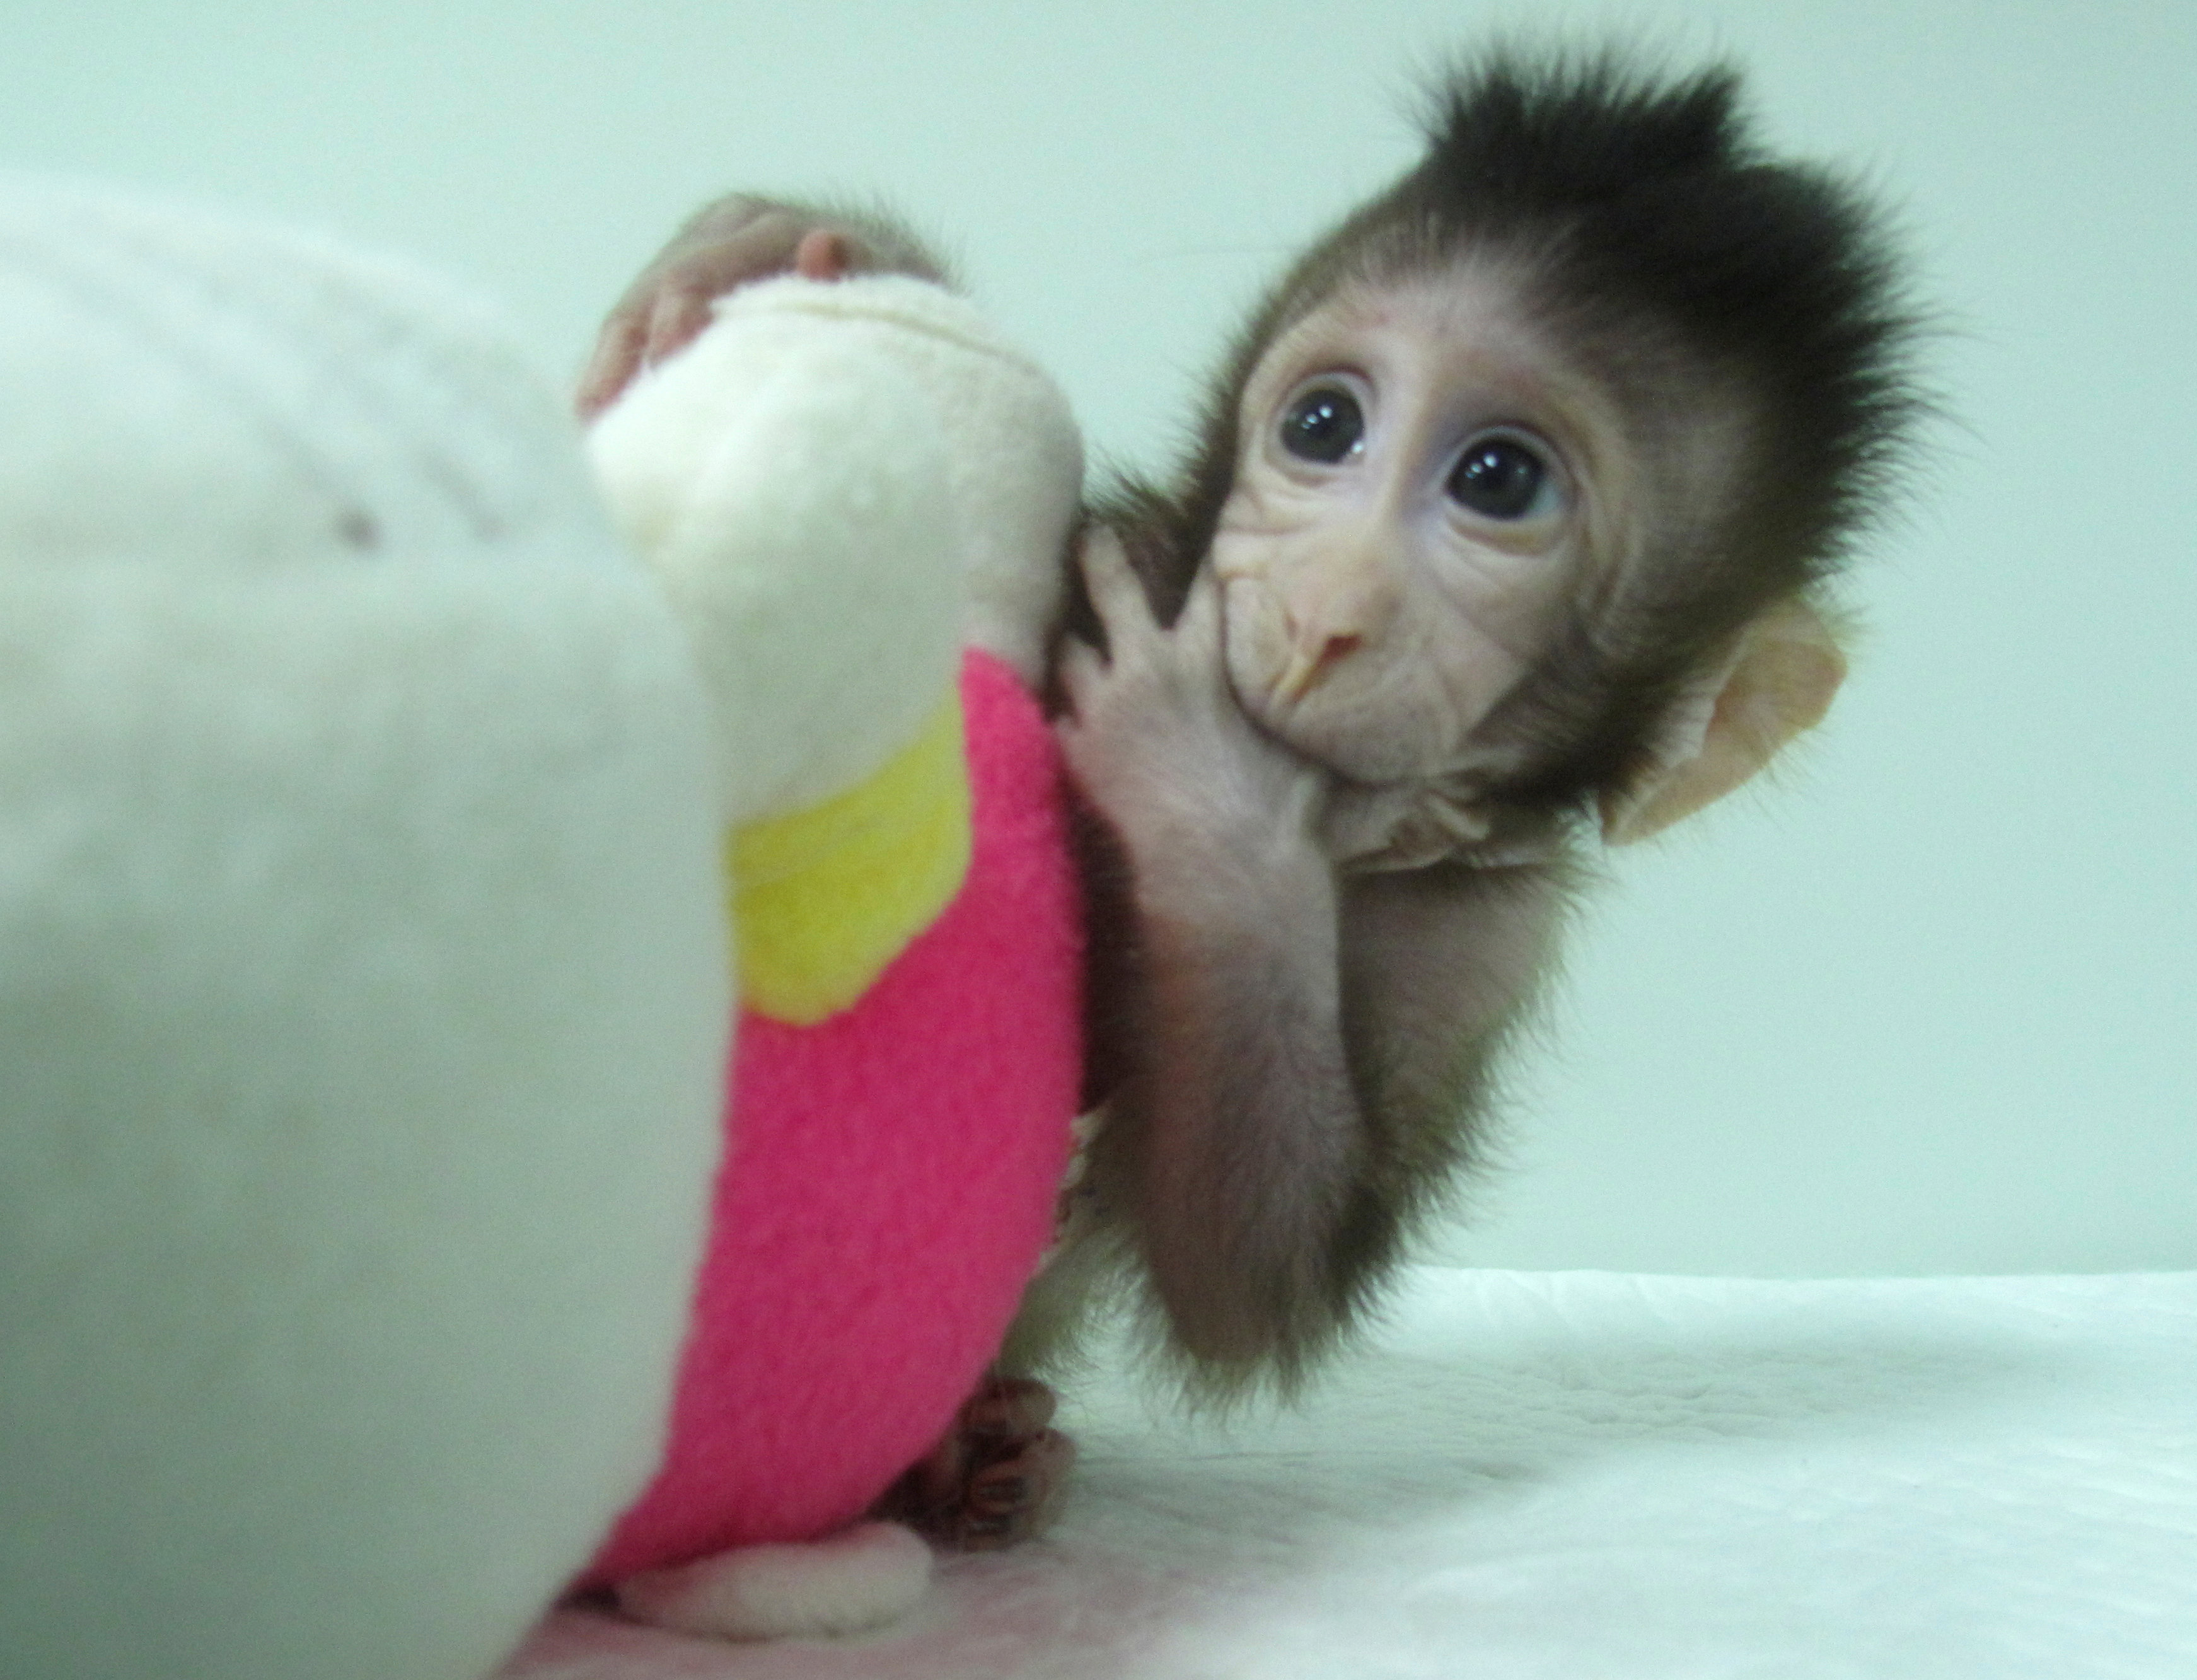 Zhong Zhong, a cloned long tailed macaque monkey is seen at the Non-Primate facility at the Chinese Academy of Sciences in Shanghai, China January 10, 2018.